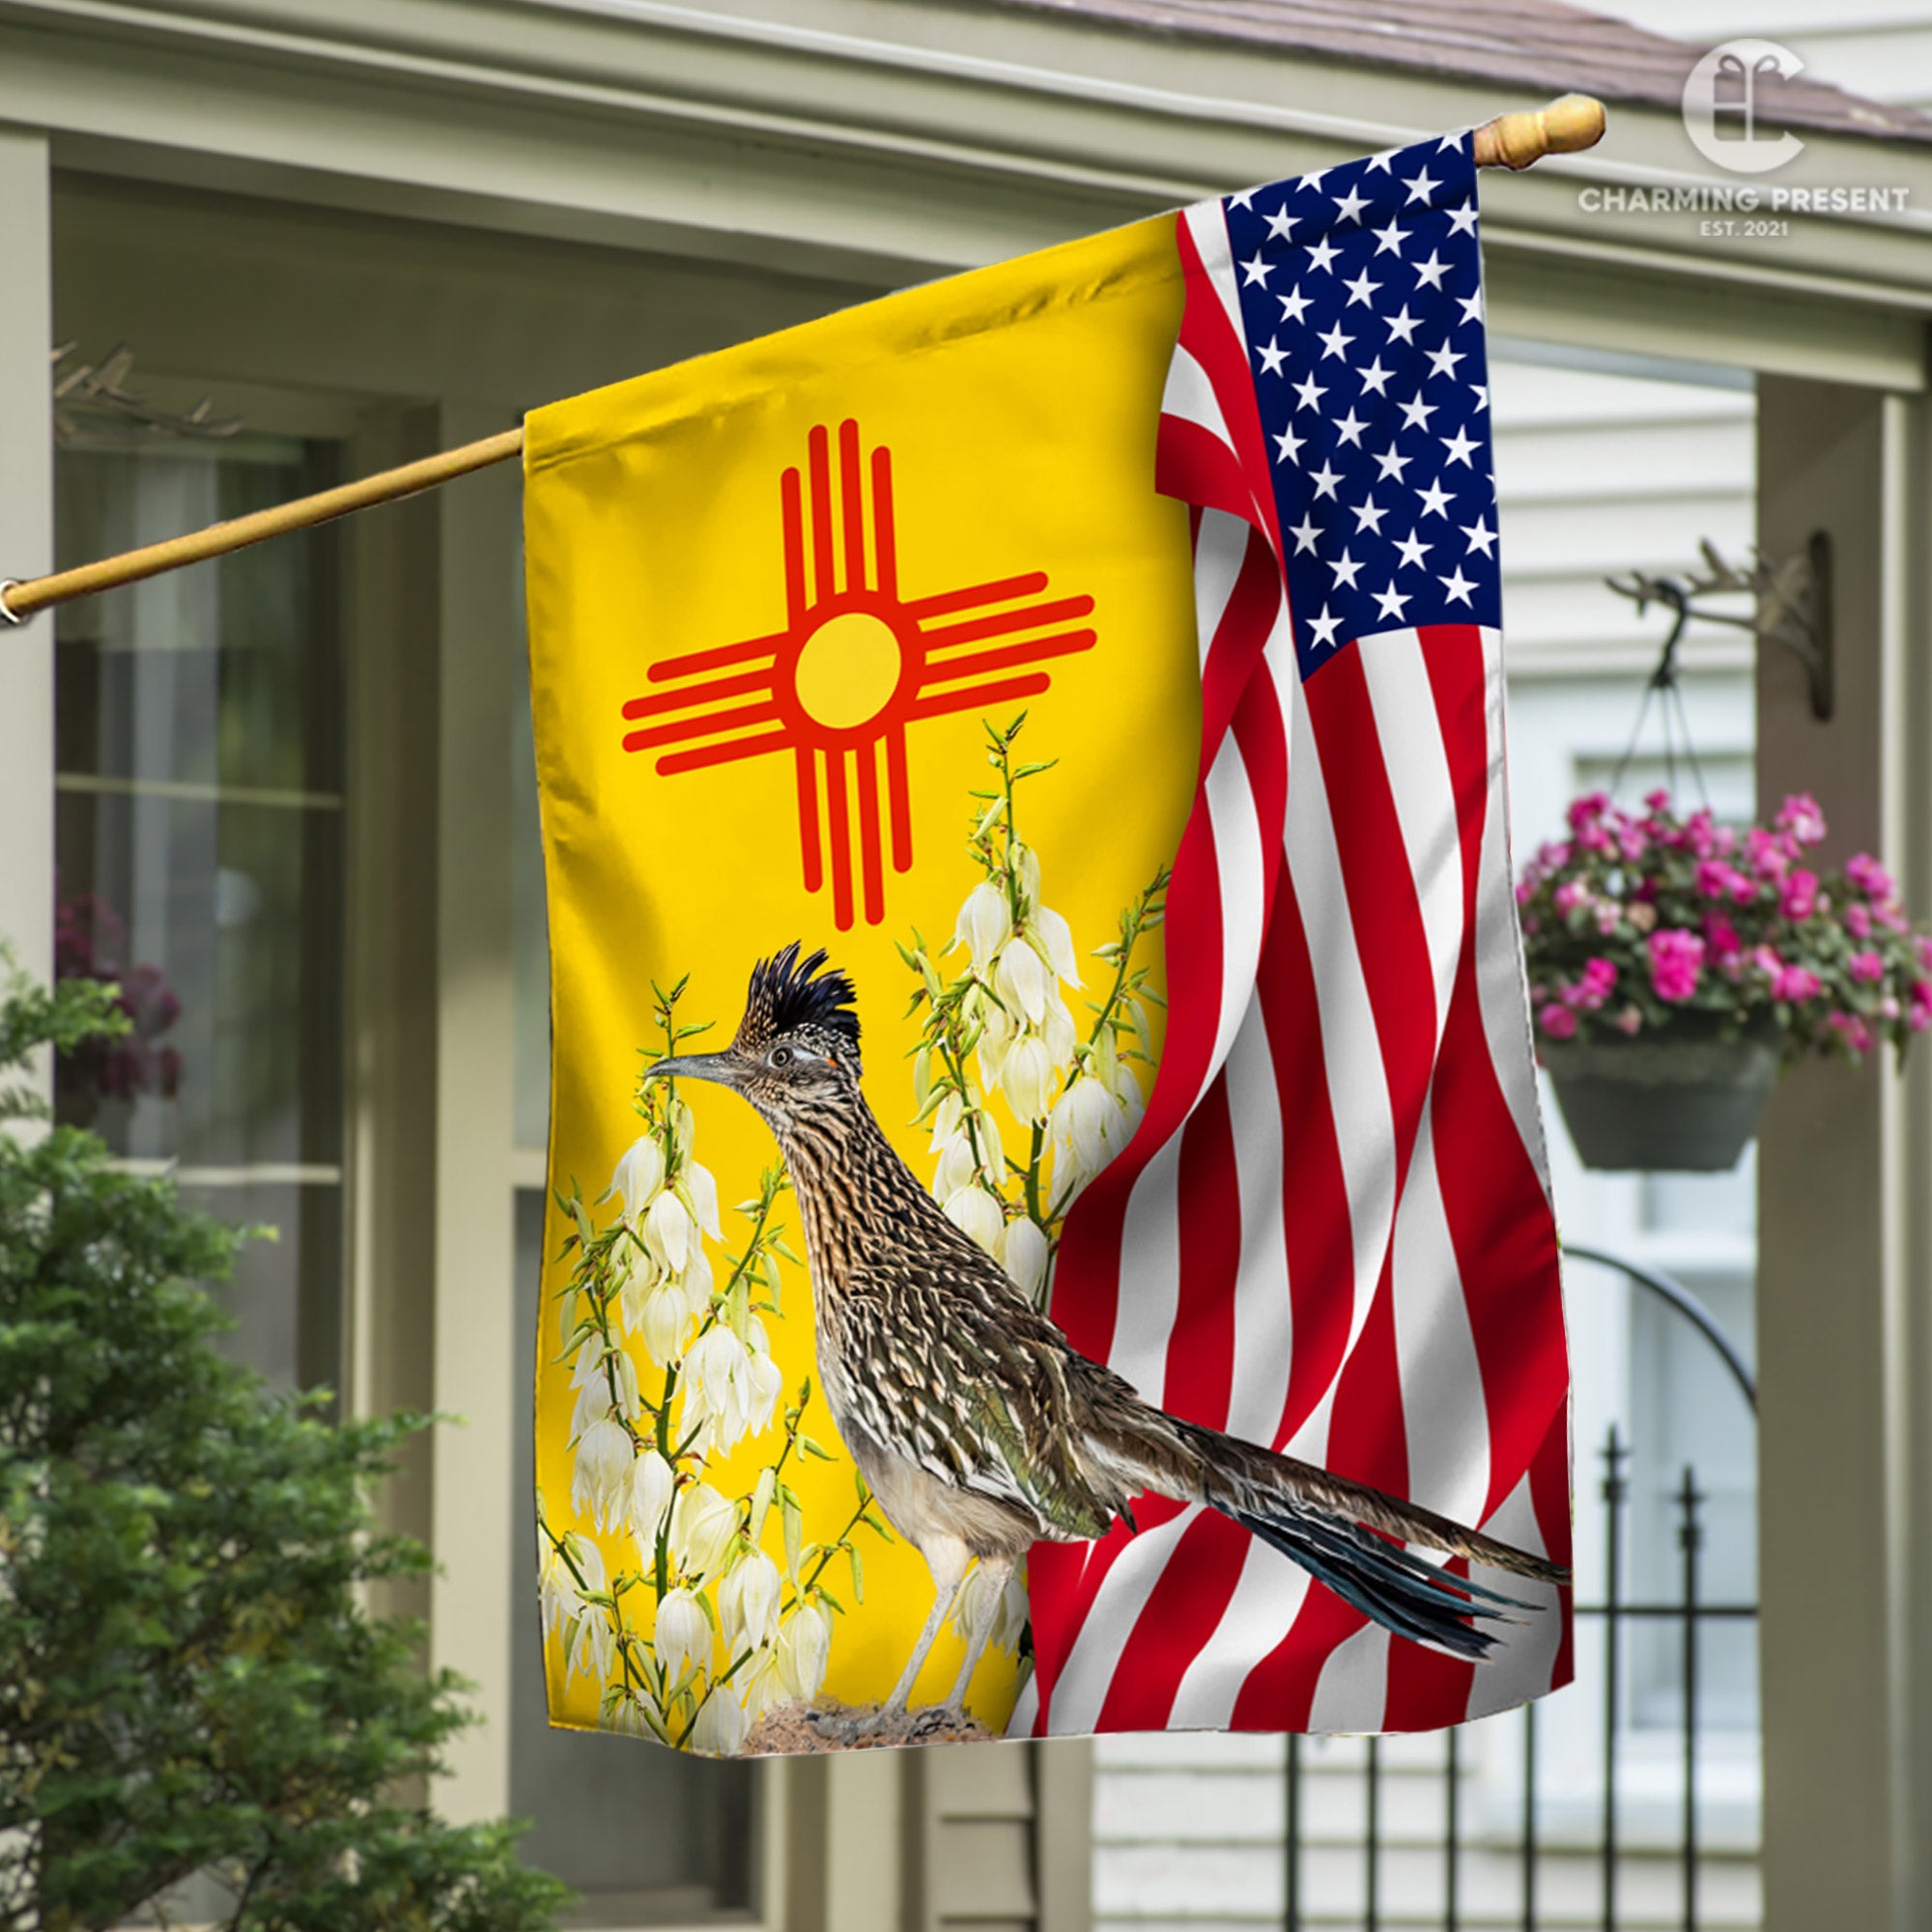 New Mexico State Flag Carolina Roadrunner Bird With Yucca Flower - American New Mexico State Decoration